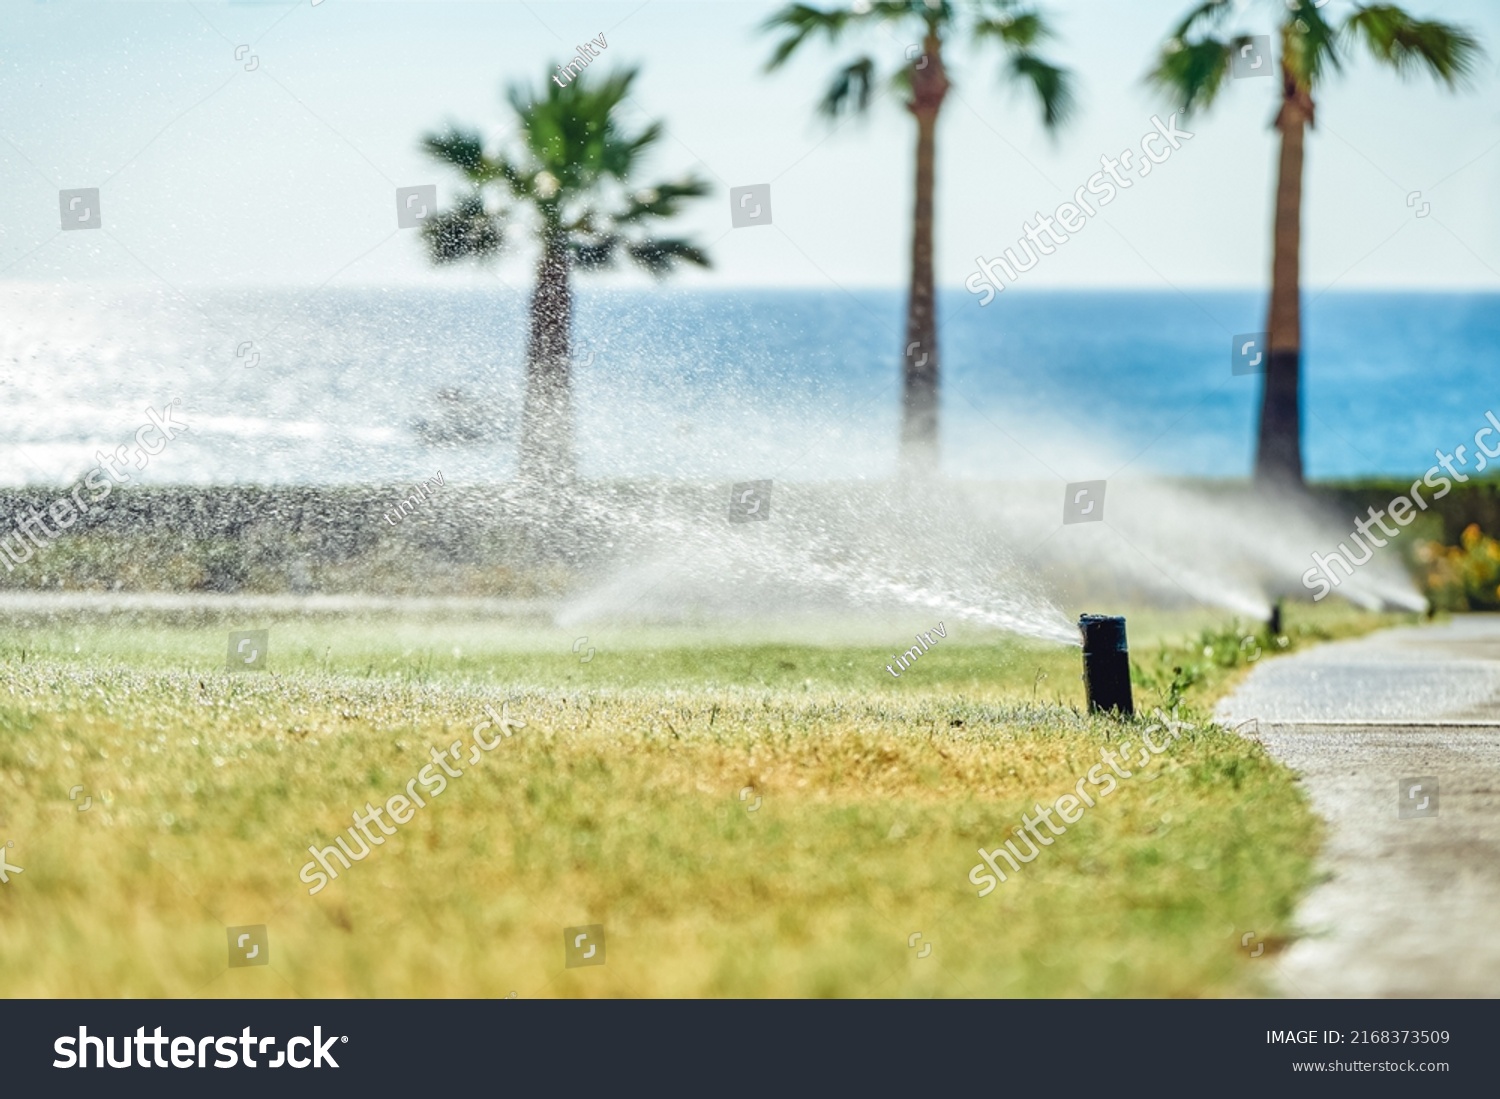 Watering system sprays water on green lawn on territory of hotel. Grass watered on bright sunny day at resort. Summer vacation close view #2168373509